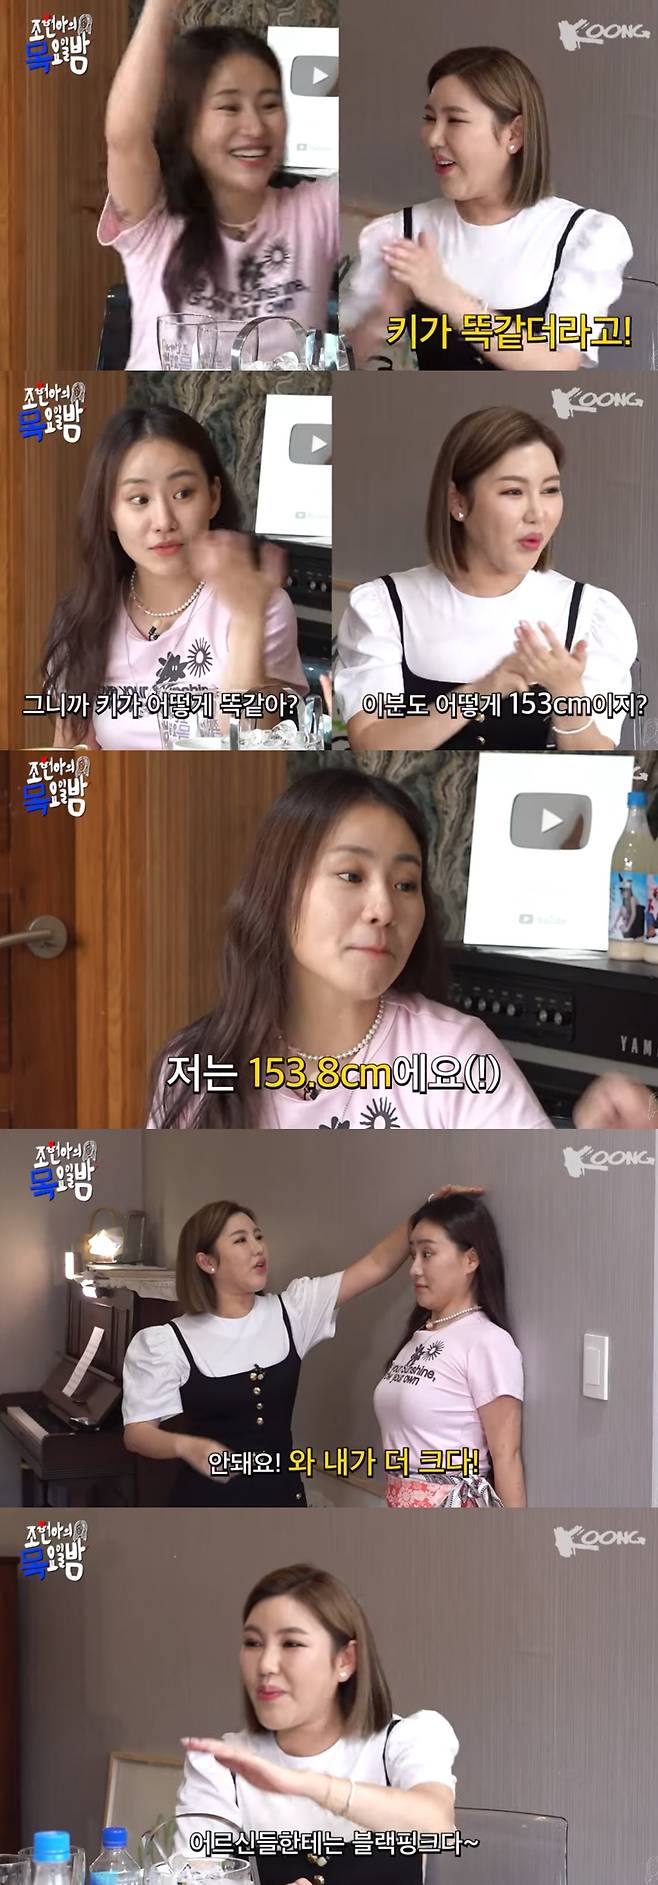 Trot singer Song Ga-in challenged ballad singer Jo Hyun Ah with a key, not a song.On the 10th Jo Hyun Ahs Thursday Night channel, a video titled Hyodo Concert Intuition and I have lost my mind was posted.The guest of the day is Trot Queen Song Ga-in. Jo Hyun Ah welcomed the guest with Song of Cain saying, The most famous person in the world came out.Song Ga-in said to the MBTI question, I am an old person, so I only know the Blood type. It is type A. Jo Hyun Ah said, I am type A.Song Ga-in said, We have the same thing. The height is the same. How could it be 153cm just like me?Jo Hyun Ah said, My sister is 153.8cm tall. I think Im taller. Song Ga-in replied, Arent you a little shorter? I think Im taller when I come in.Eventually, the two went into the Theory of Ambitions, causing the producers to laugh at the same key to make it difficult to distinguish, but Jasins taller Acorns (?) Was raised by hand against the wall, and Song Ga-in provoked a laugh by provoking, It is not enough for me. I am much bigger. It seems to be less than 153cm.The two showed each other a honey tip that puts their hands forward when posing with their hands, pitying each other for the disadvantage that their faces look big because of their small hands.On this day, Song Ga-in said, Sir! I am BLACKPINK, and I seated 78-year-old Jo Hyun Ah Father, a fan of Jasin, in the first row and gave Song for him only to pour Jo Hyun Ahs impressive tears.